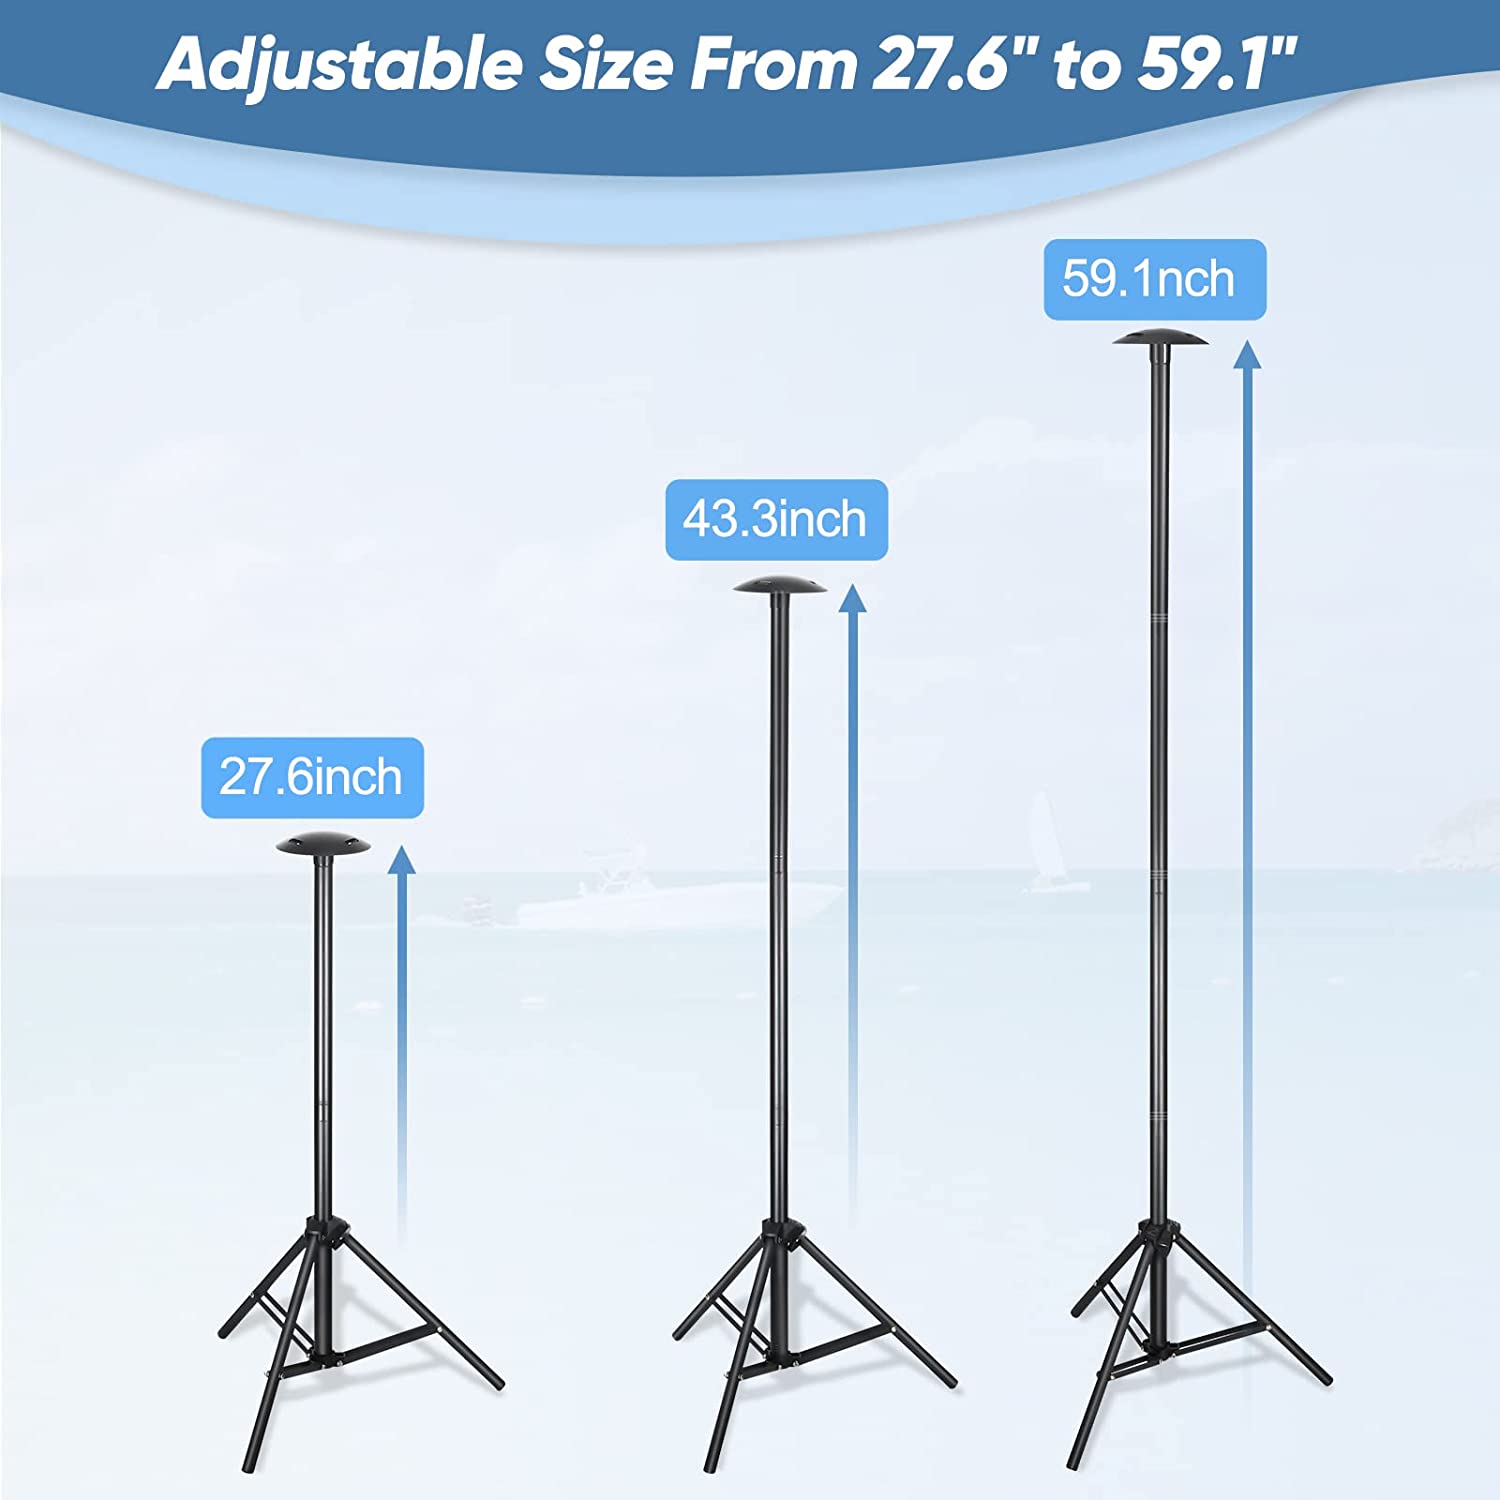 DACK Boat Cover Support Poles Stand System,Pontoon Boat Cover Support with Metal Tripod Base,27-59 inch Boat Cover Poles Adjustable with 3 Straps